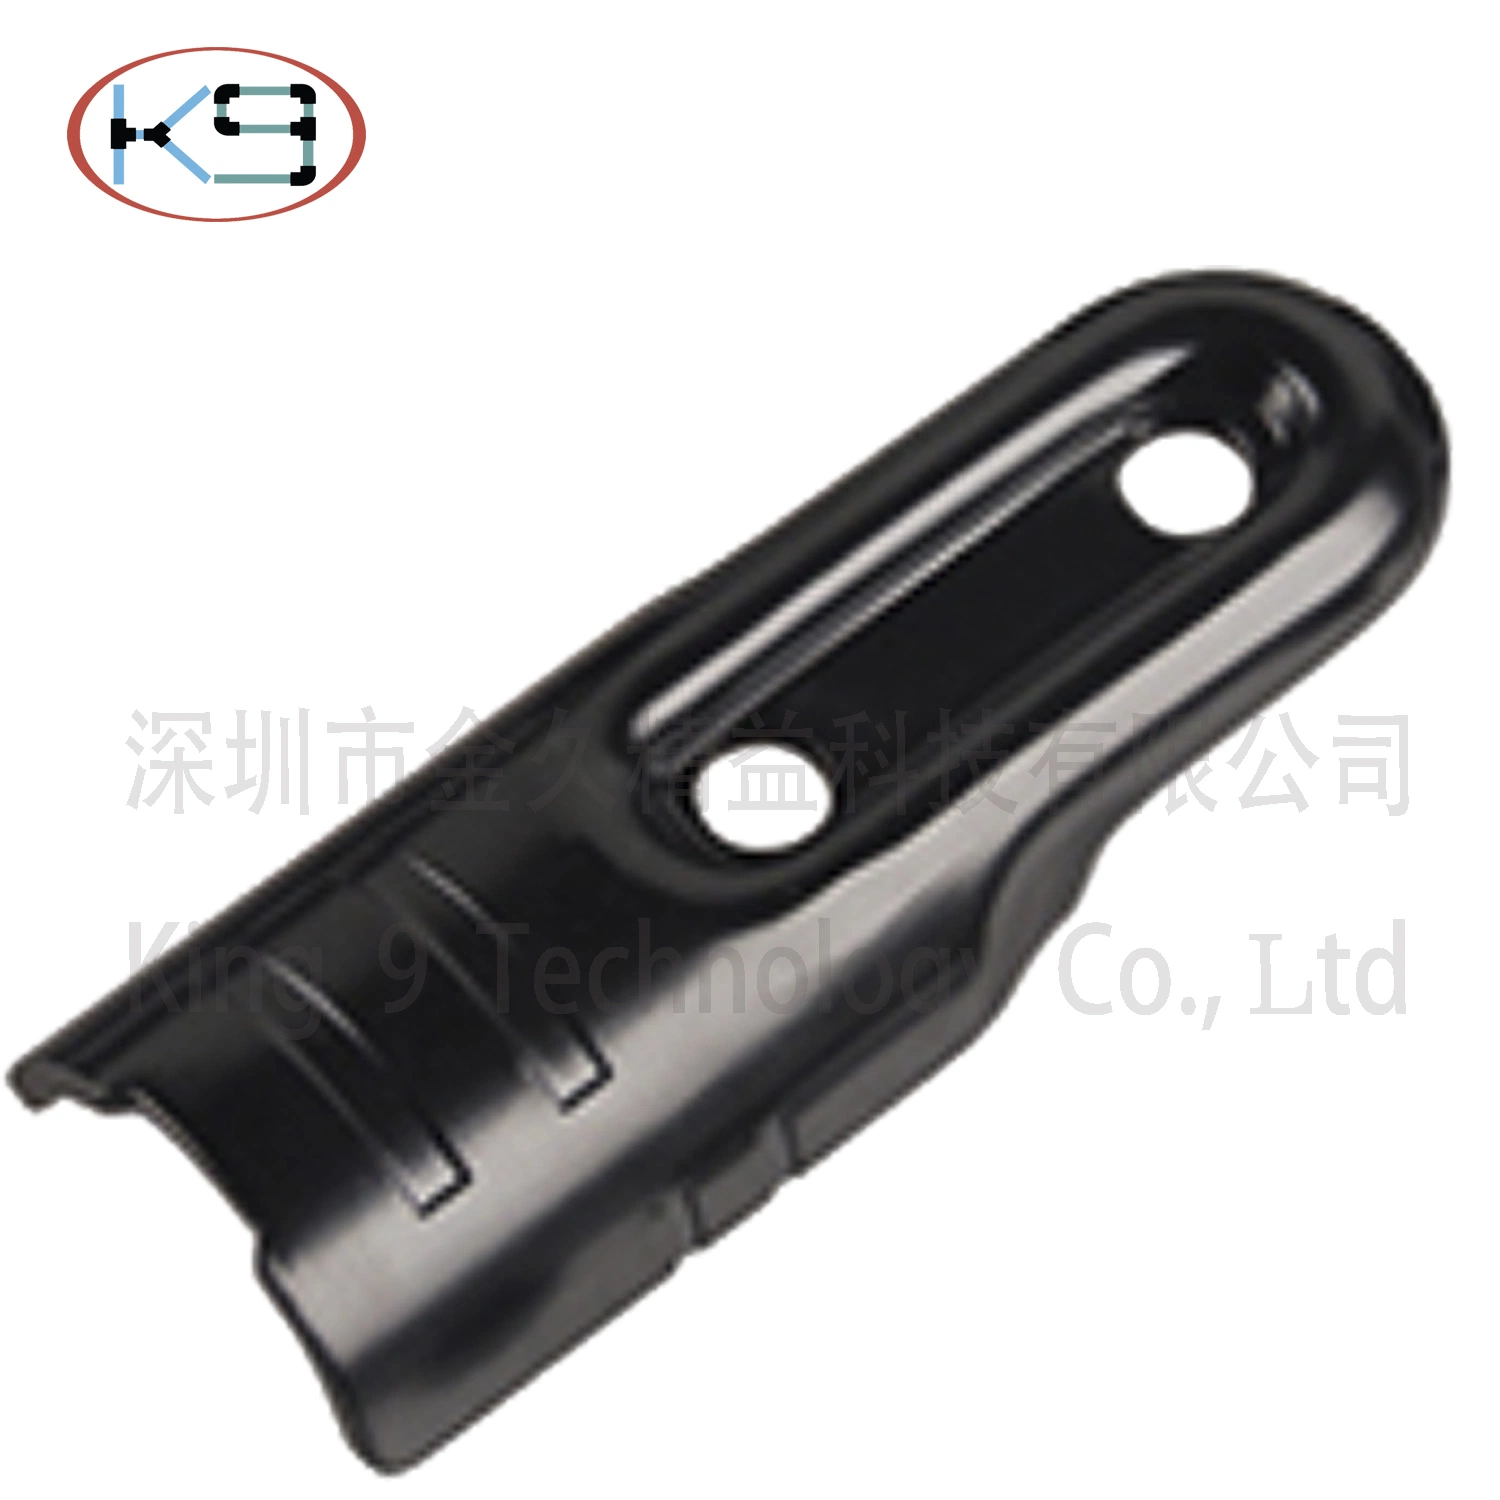 Metal Joint for Lean System /Pipe Fitting (K-6)